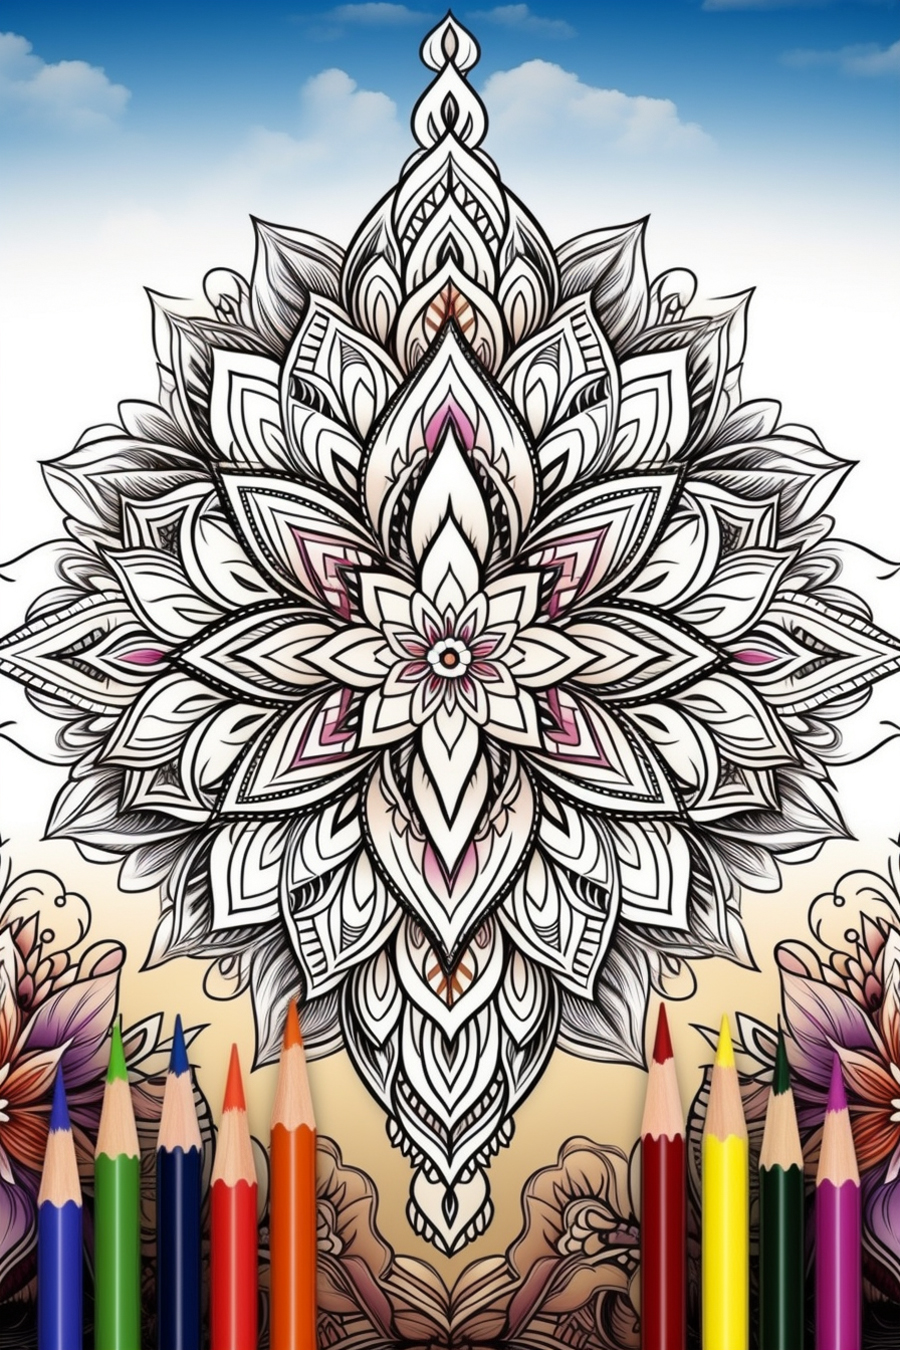 A coloring book with a mandala.